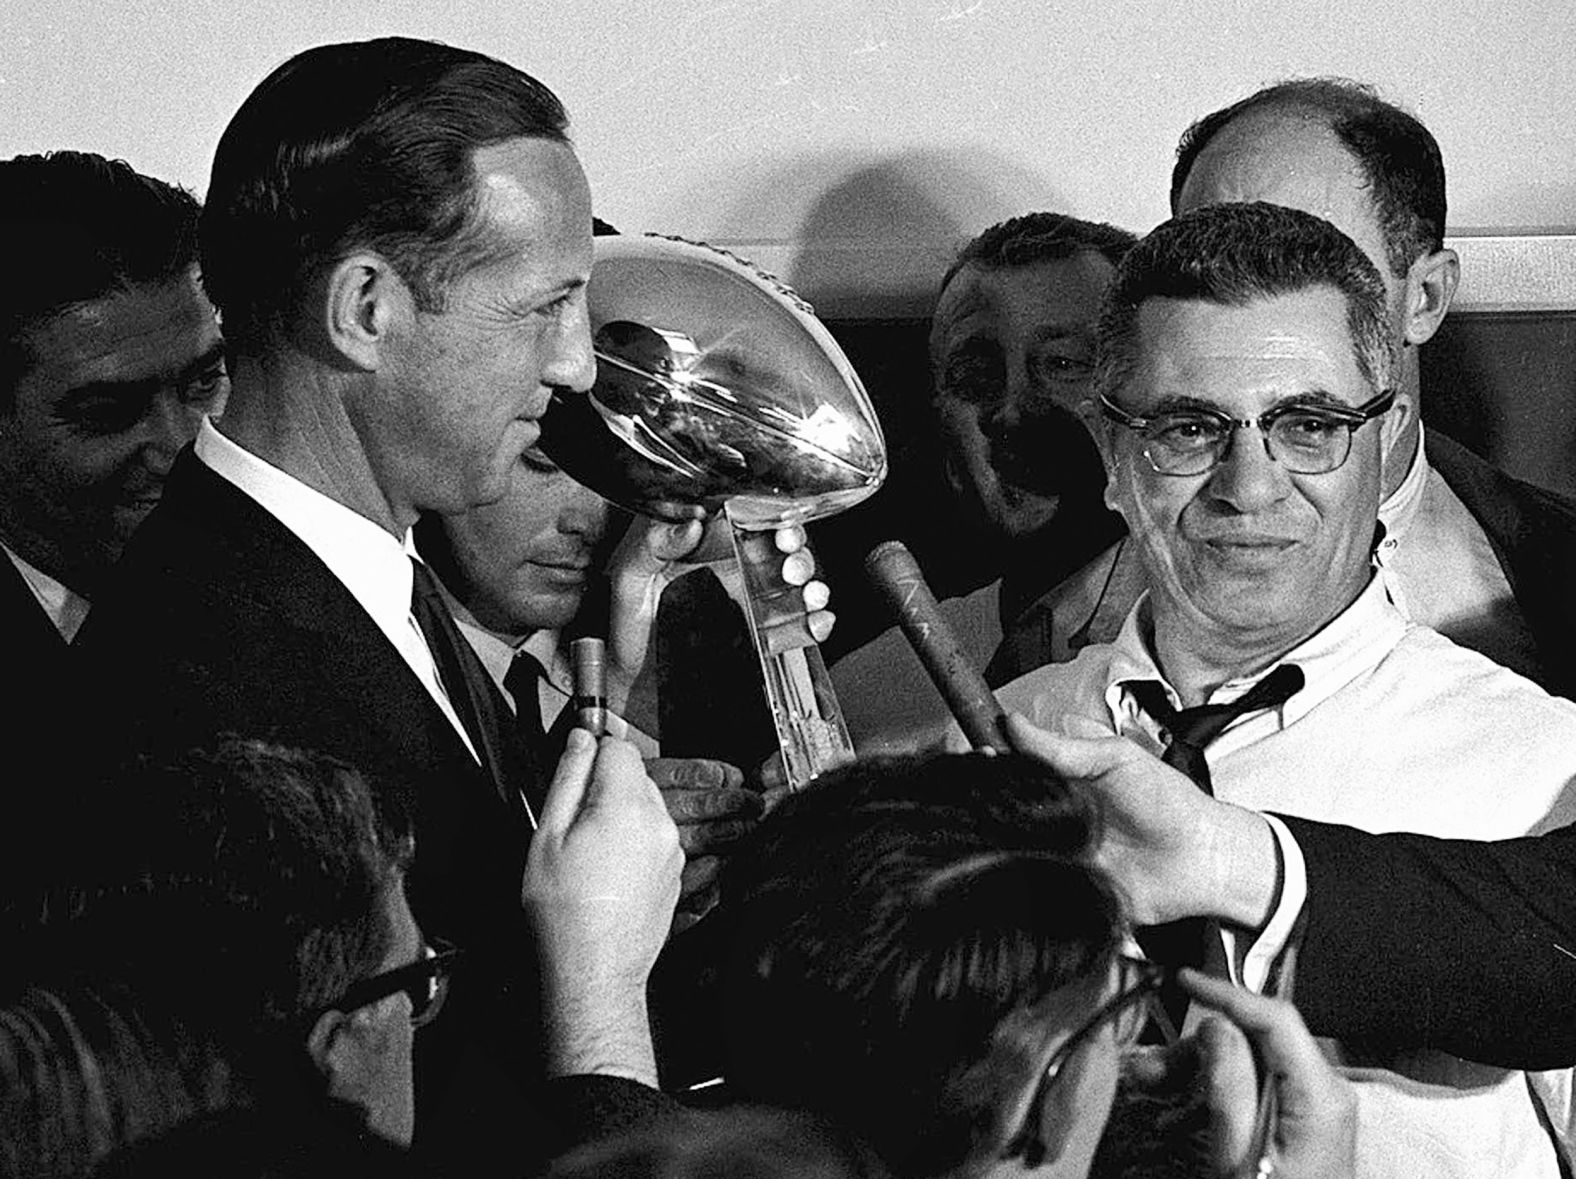 NFL commissioner Pete Rozelle, left, presents the championship trophy to Packers head coach Vince Lombardi after the game. The trophy was renamed the Vince Lombardi Trophy after the coach's death in 1970.